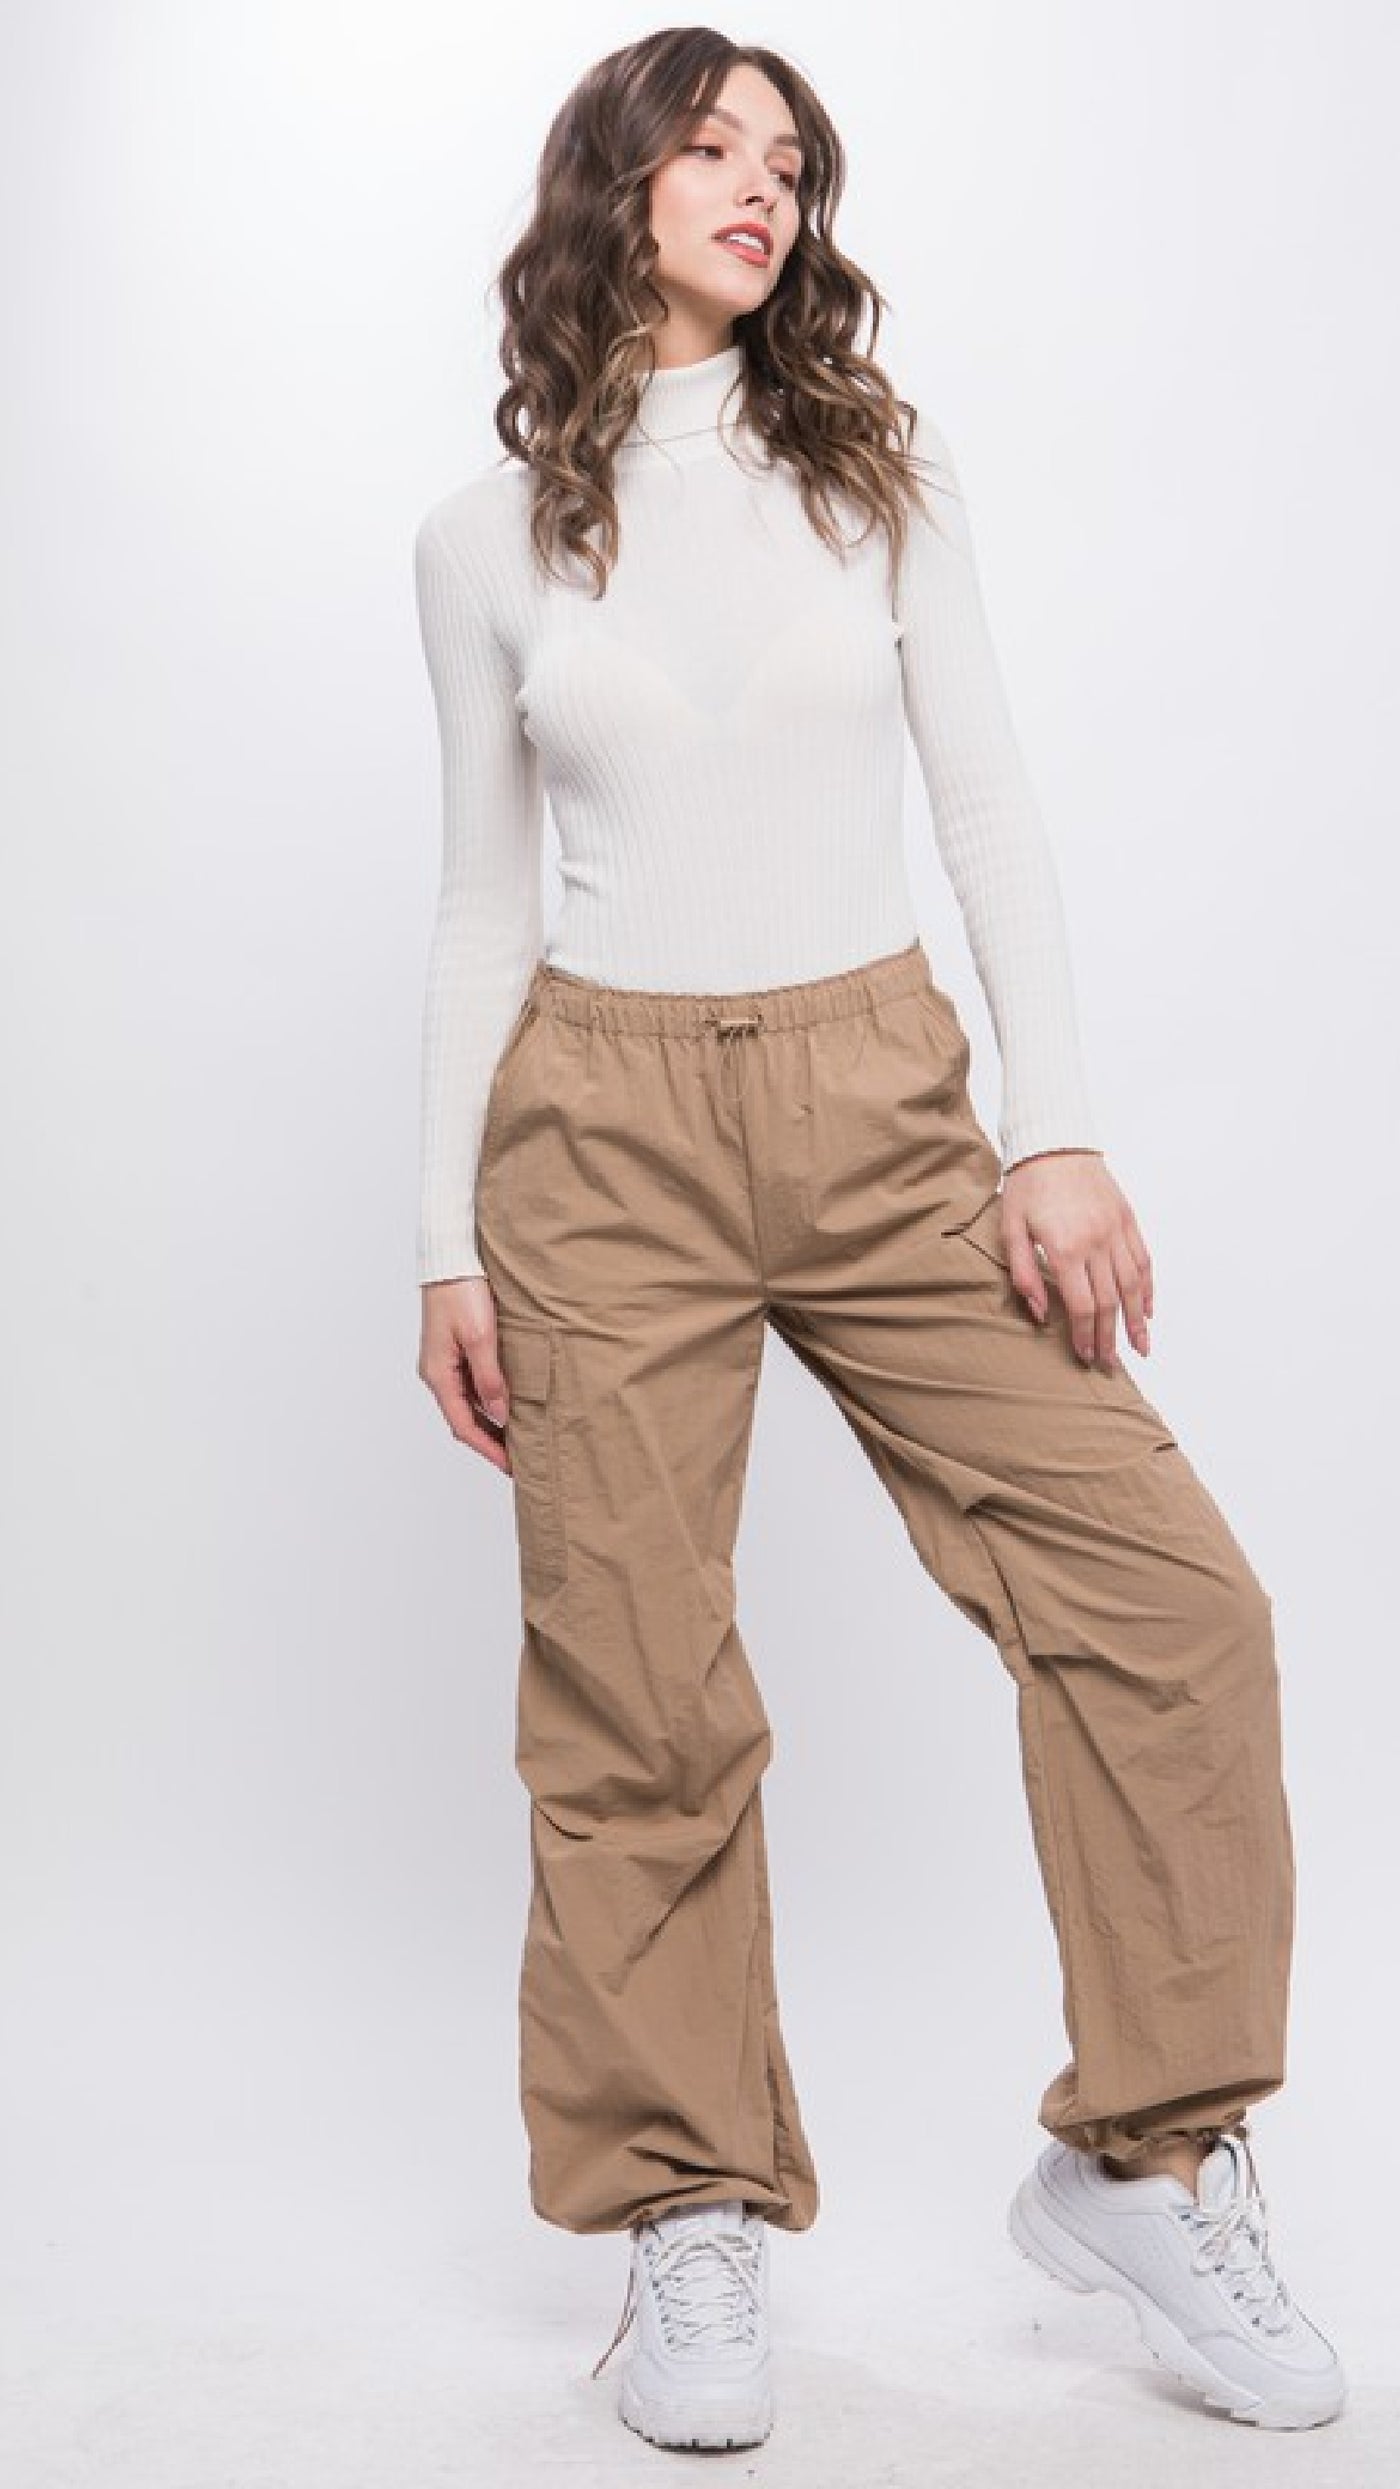 Just Looking Pants - Piper and Hollow Boutique